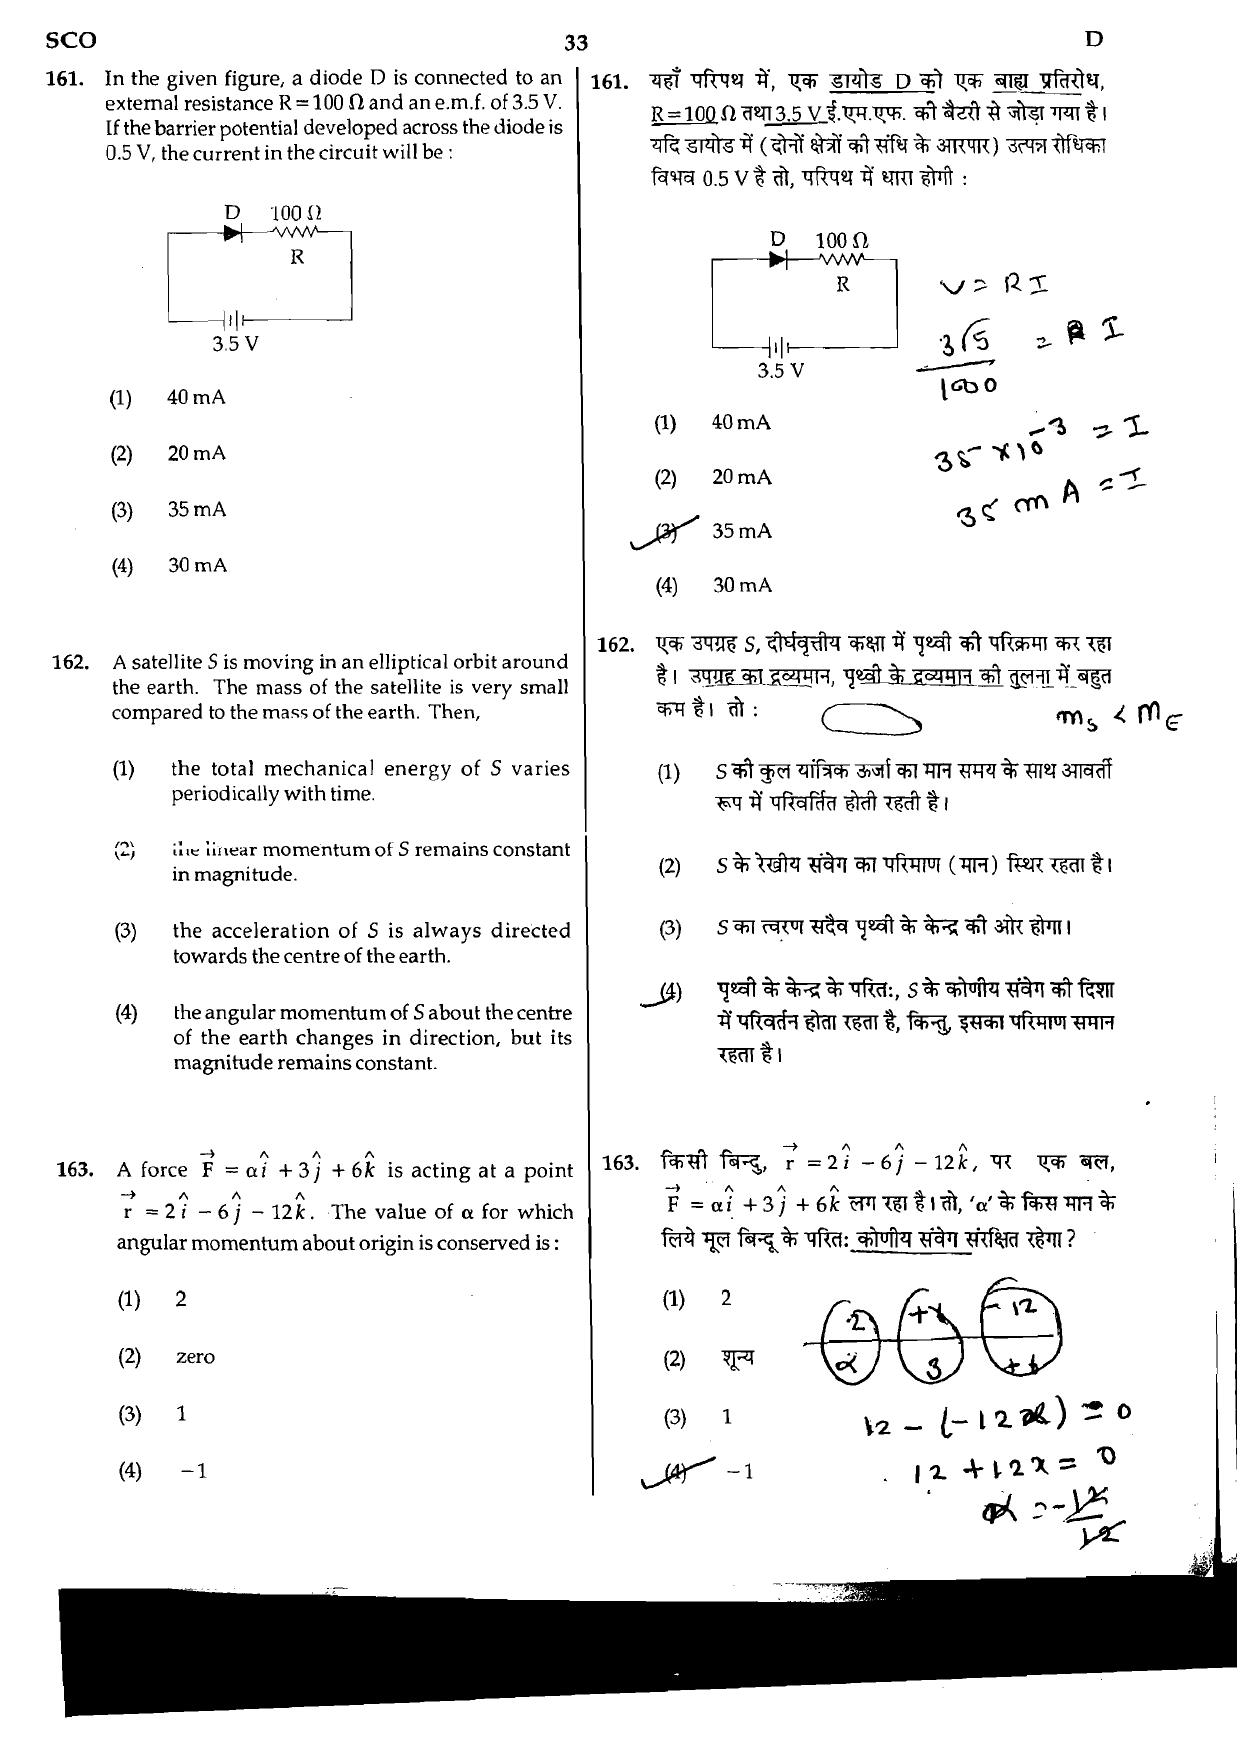 NEET Code D 2015 Question Paper - Page 33